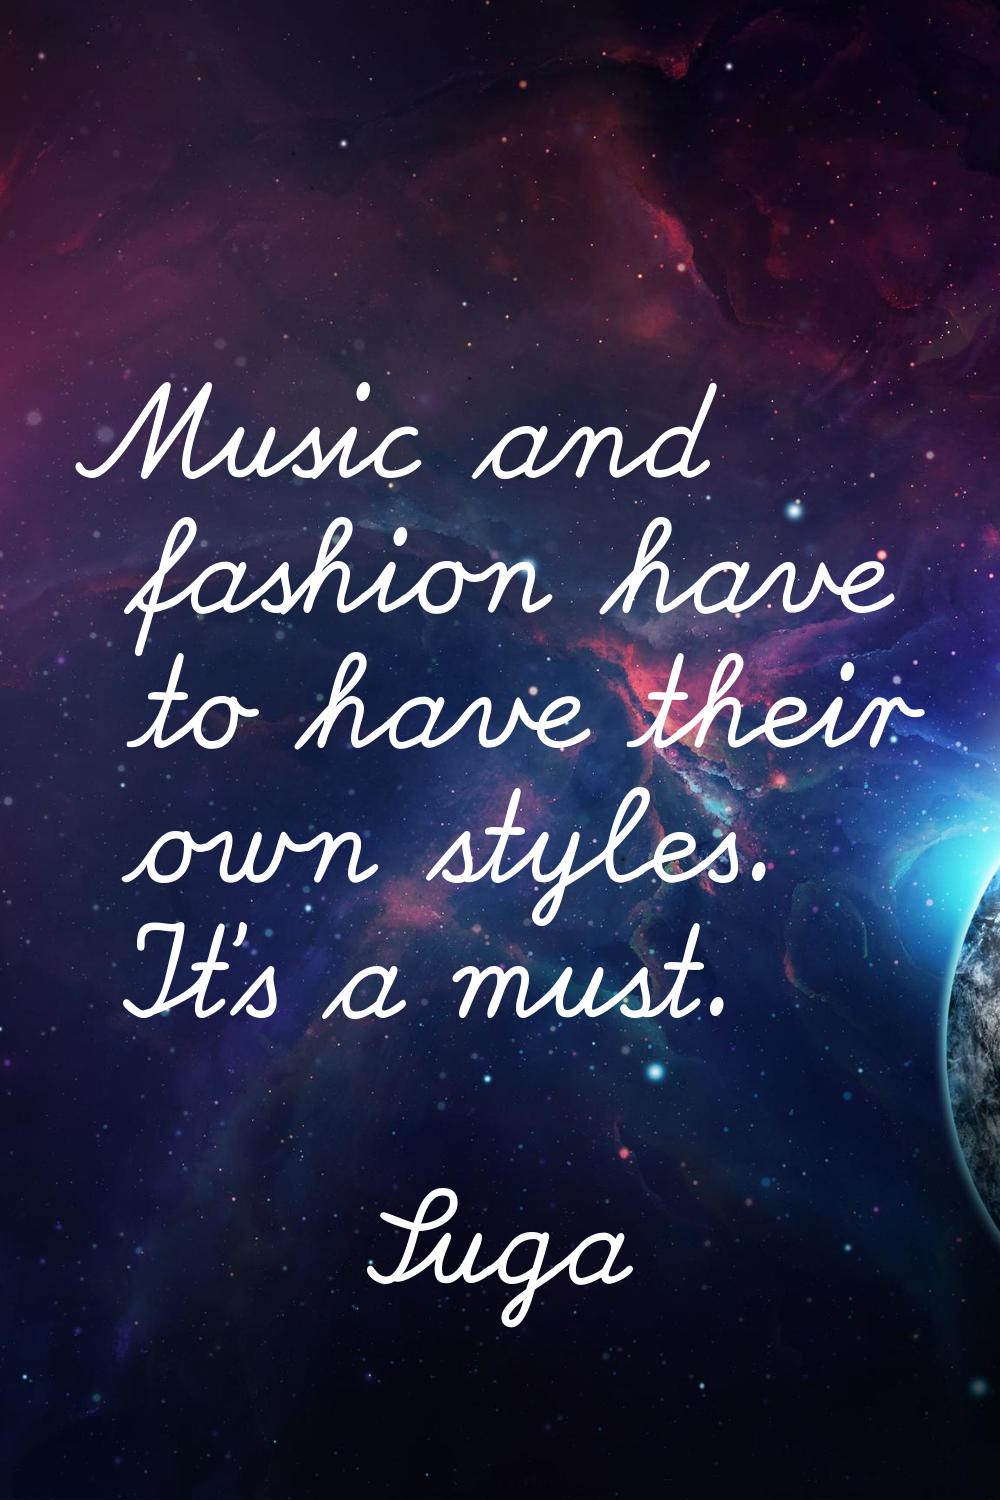 Music and fashion have to have their own styles. It's a must.